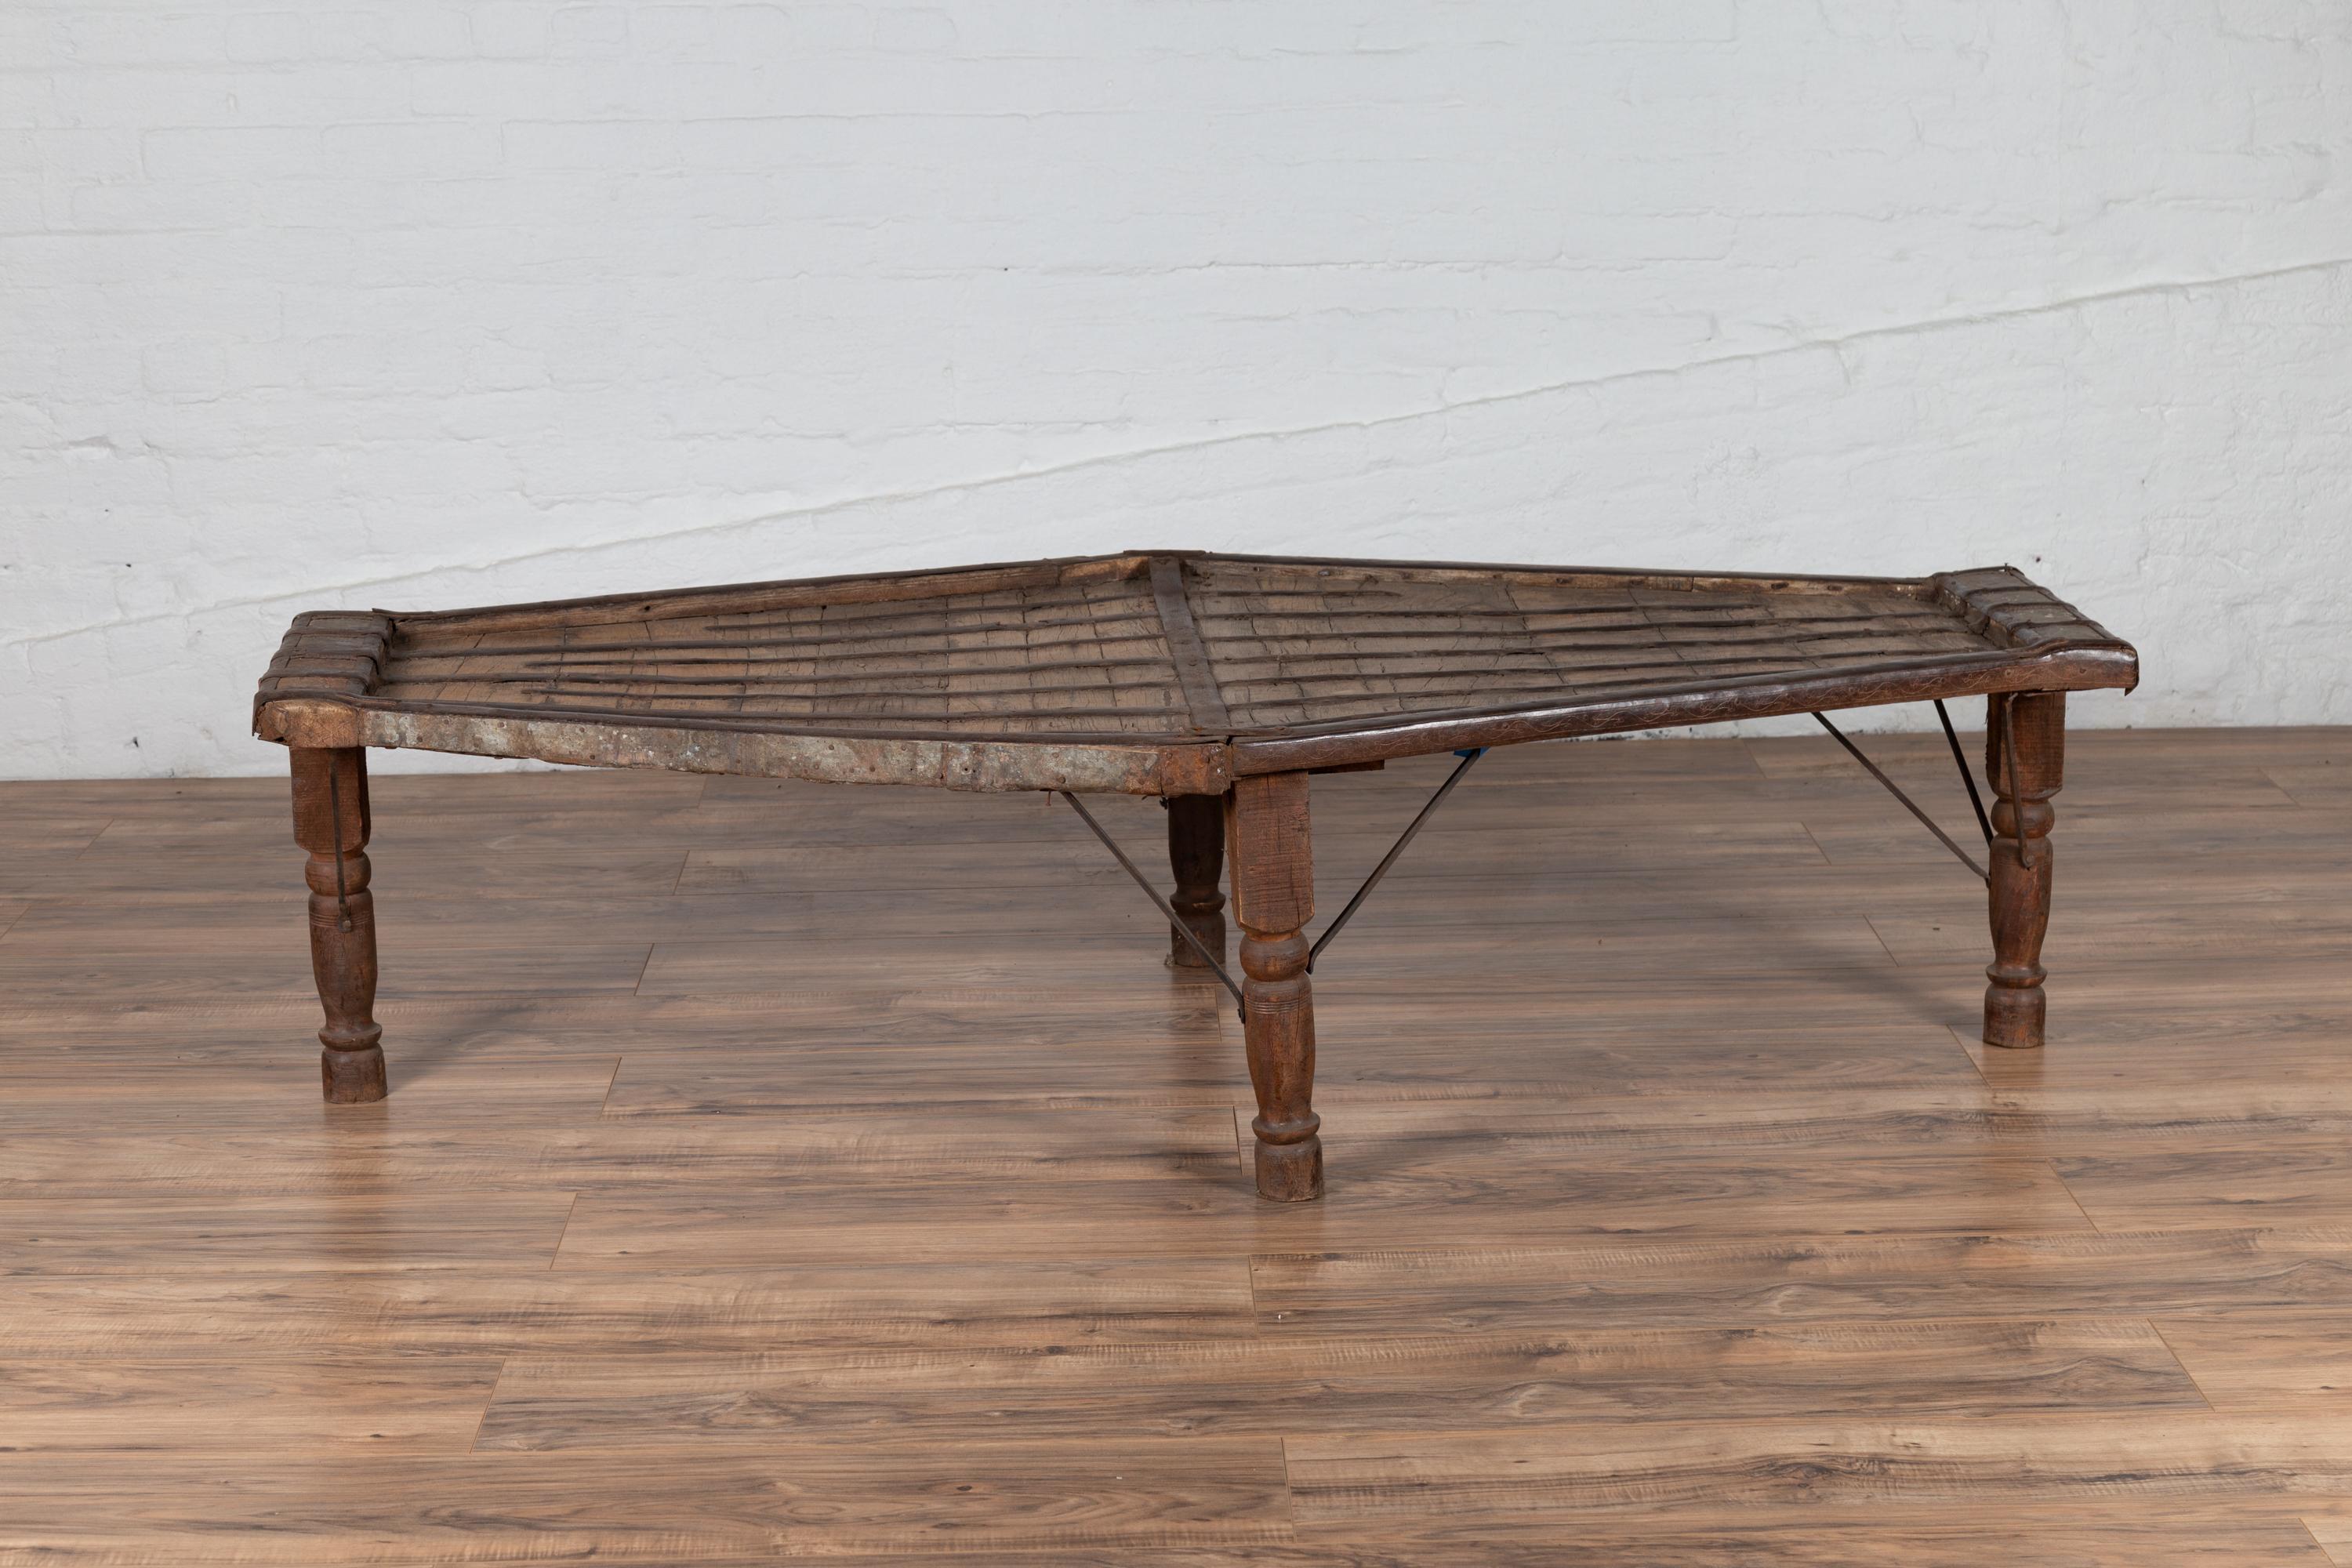 An antique Indian bullock cart coffee table from the early 20th century, originally used to carry goods. We have three similar table available, all with slight variations. Born in India during the early years of the 20th century, this rustic coffee